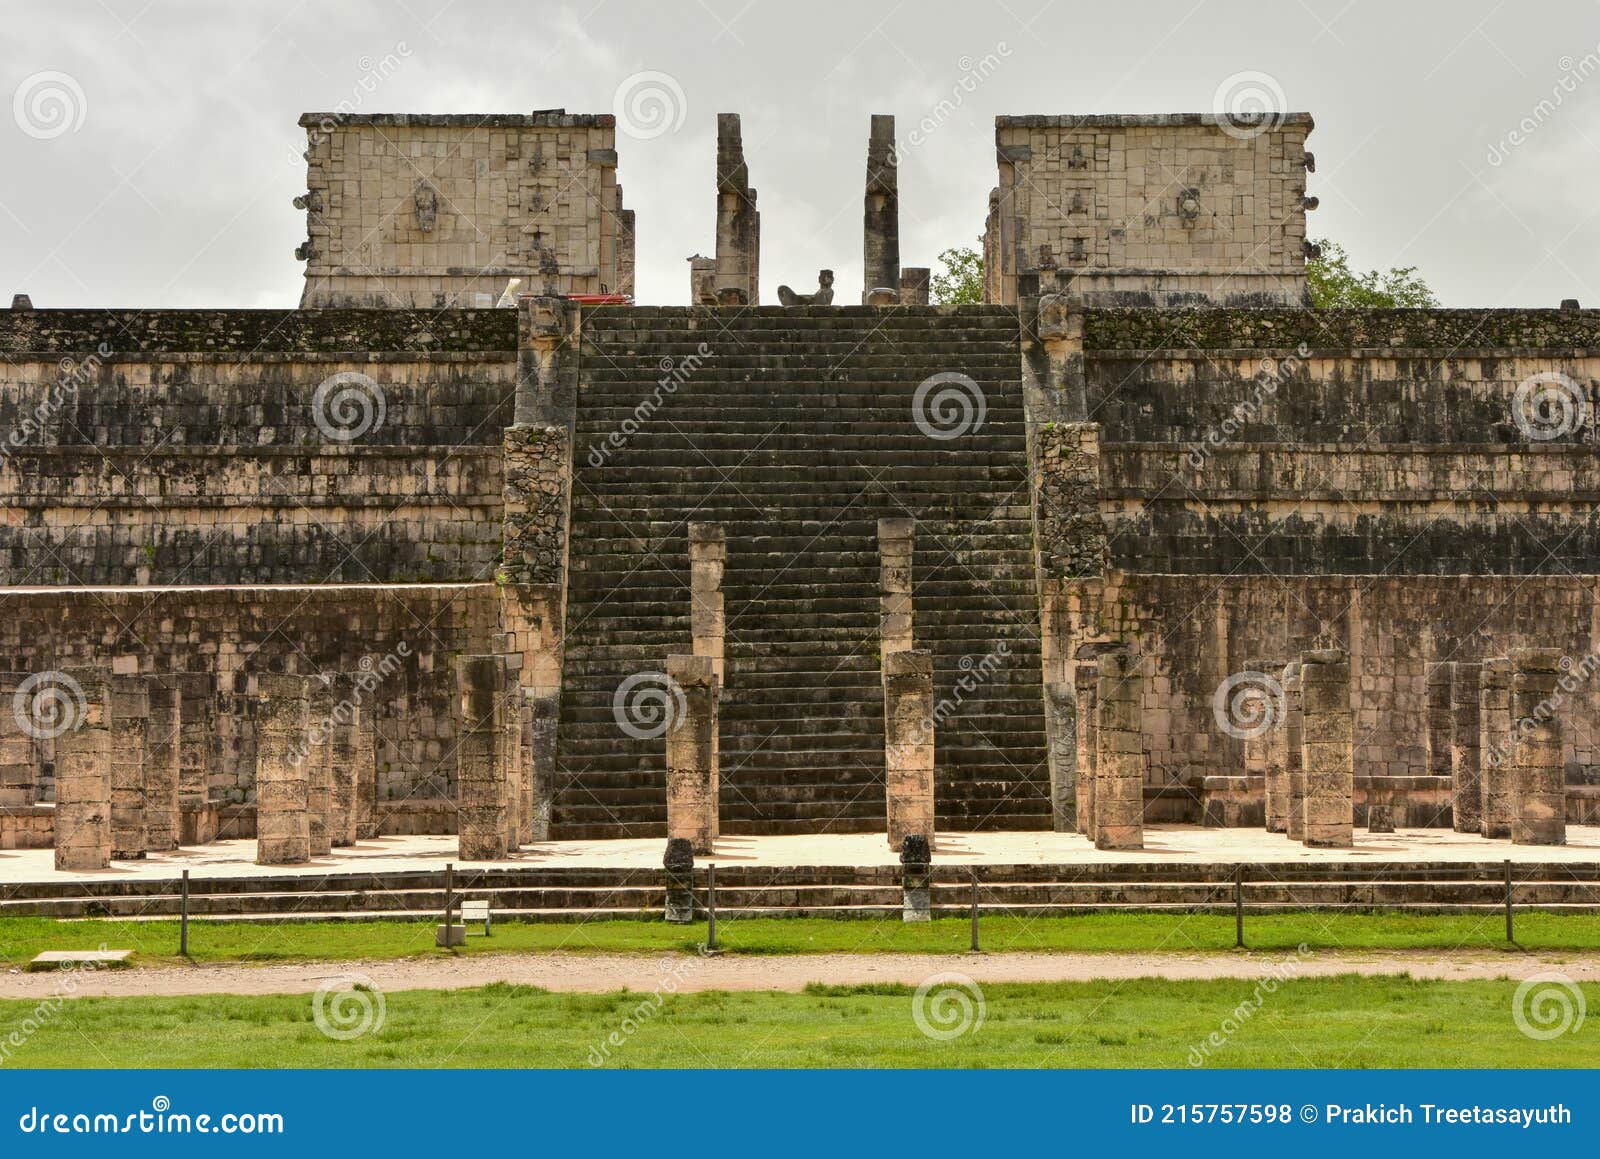 the temple of the warriors, showing a statue of chacmool, at chichen itza, a city built by the maya people in mexico